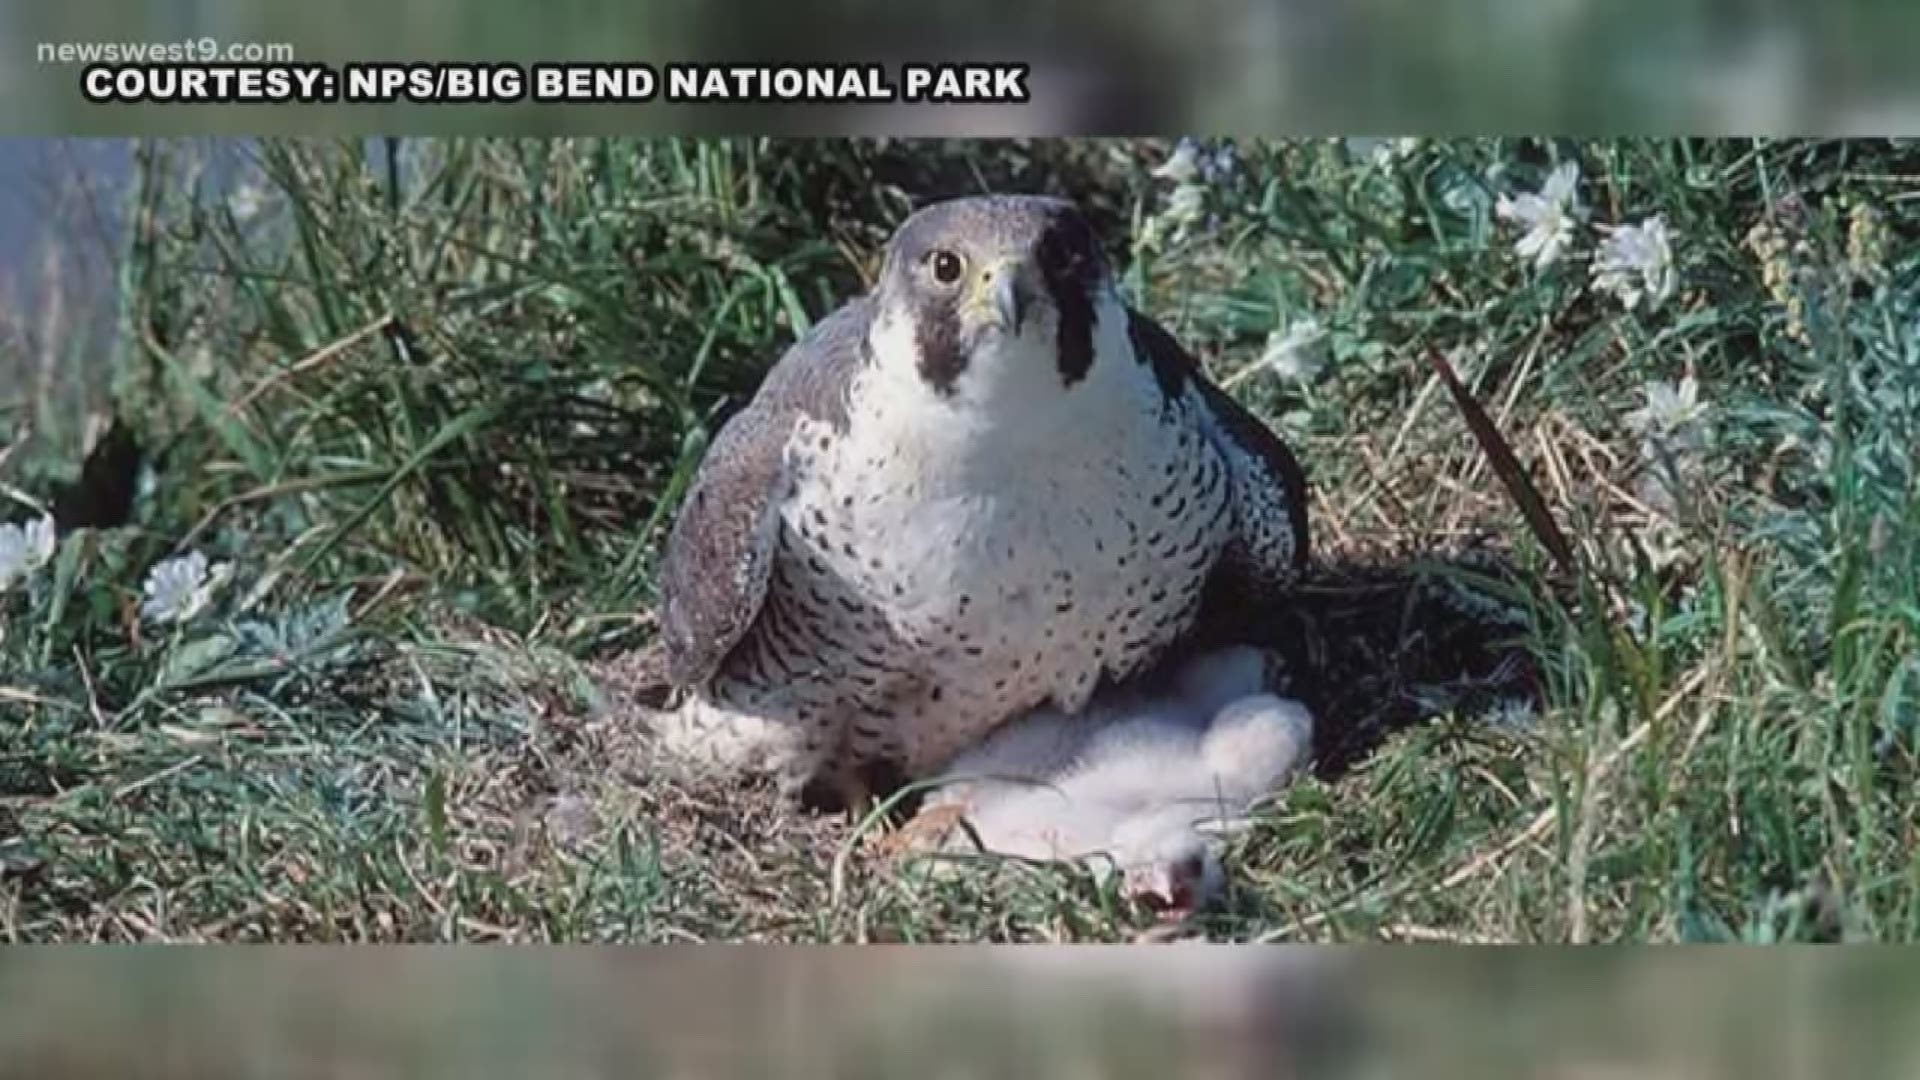 Part two at Big Bend National Park focuses on the peregrine falcon and what steps are being taken to protect this threatened species of bird.